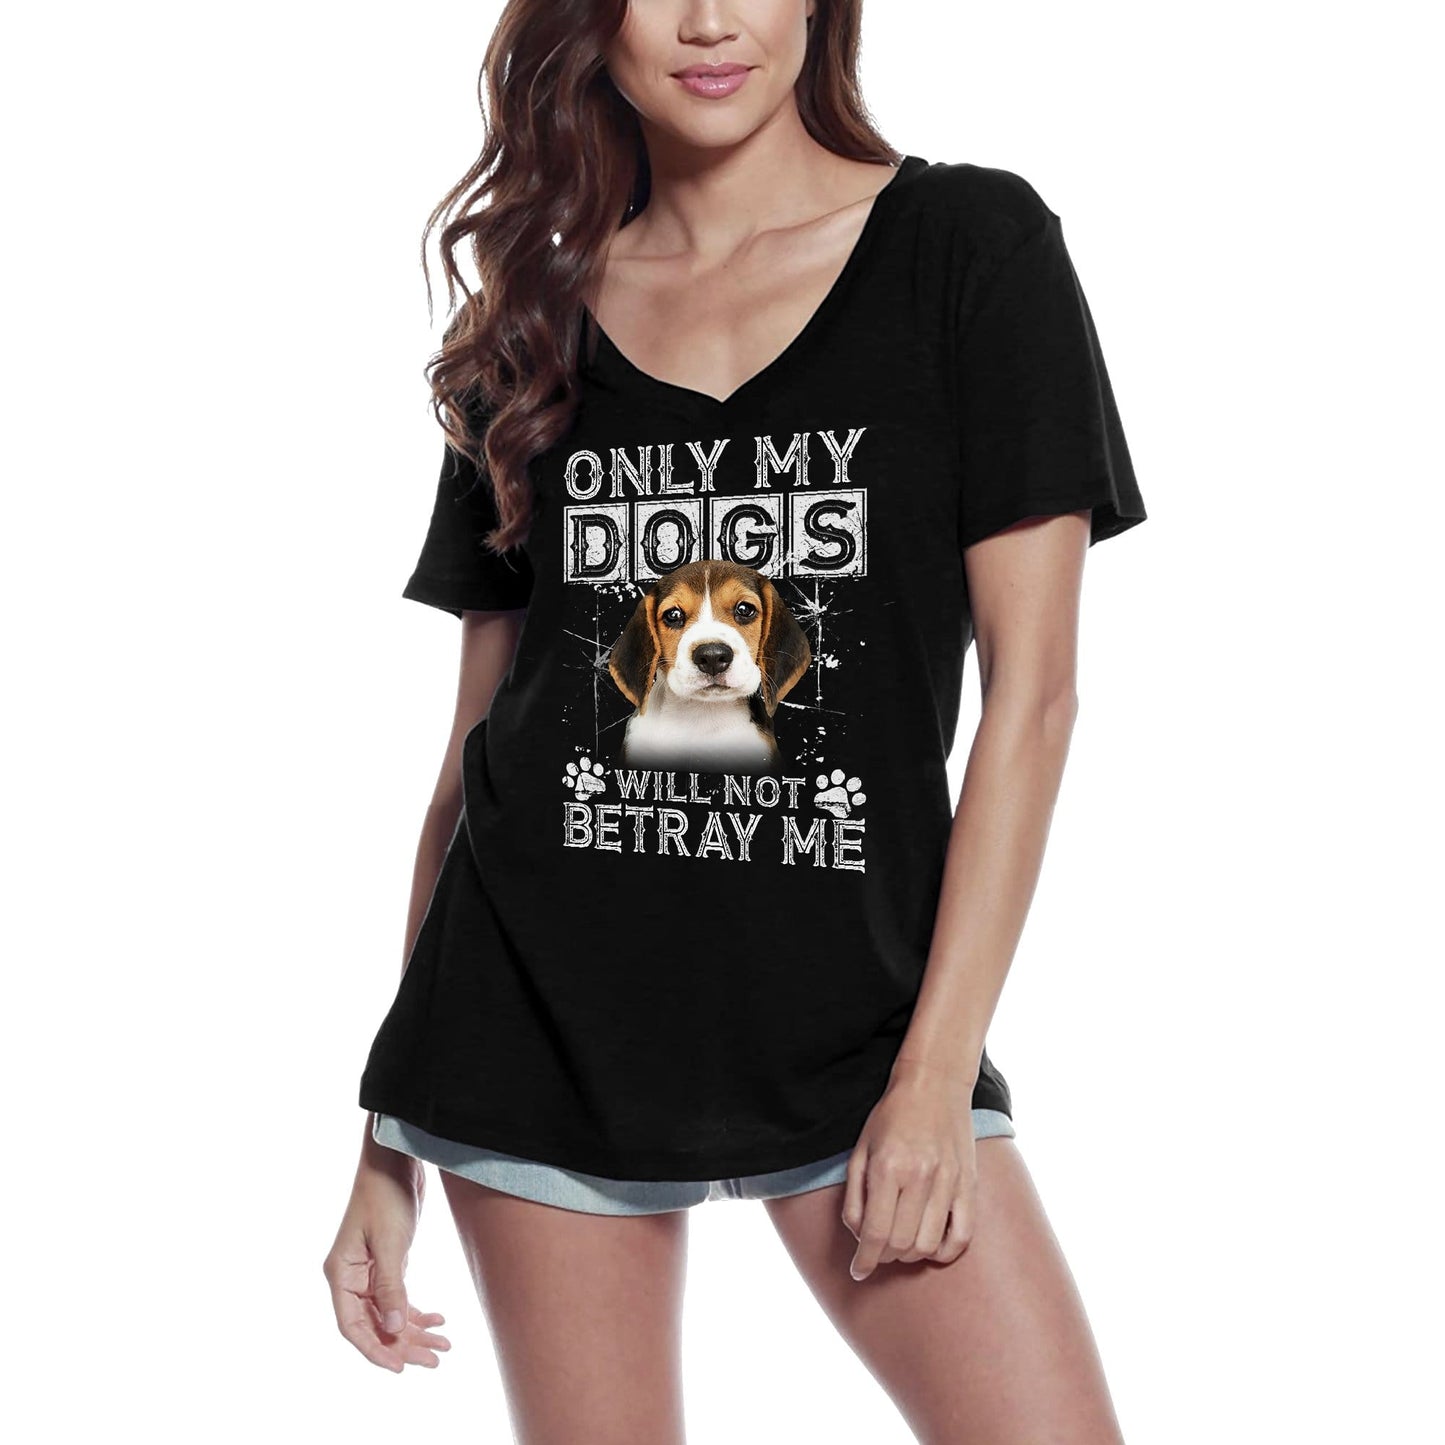 ULTRABASIC Women's T-Shirt Only My Dogs Will Not Betray Me - Beagle Cute Dog Paw